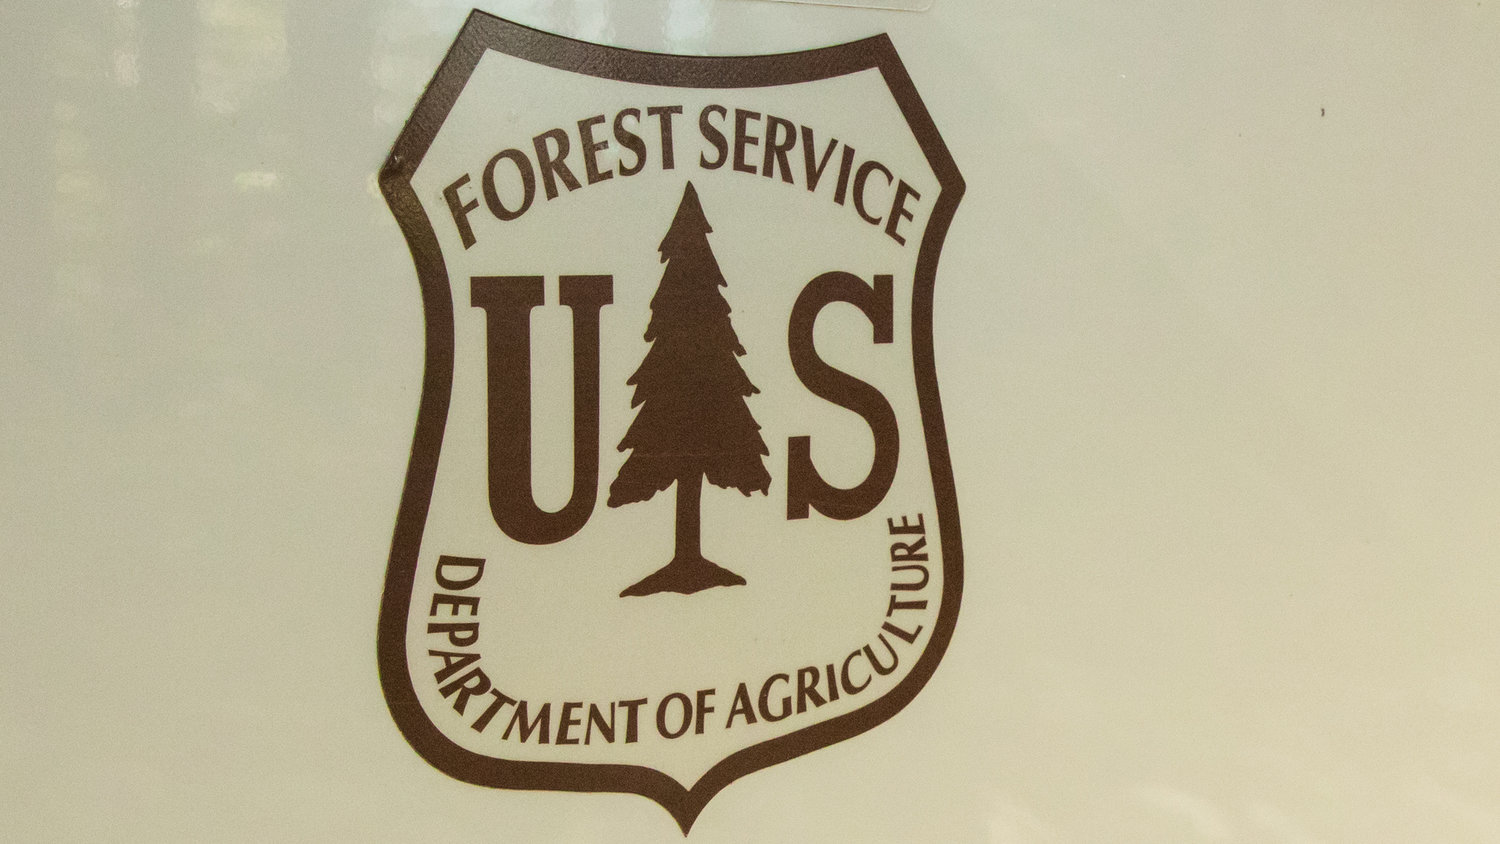 The U.S. Forest Service is an agency of the U.S. Department of Agriculture that manages 20 national grasslands and 154 national forests.